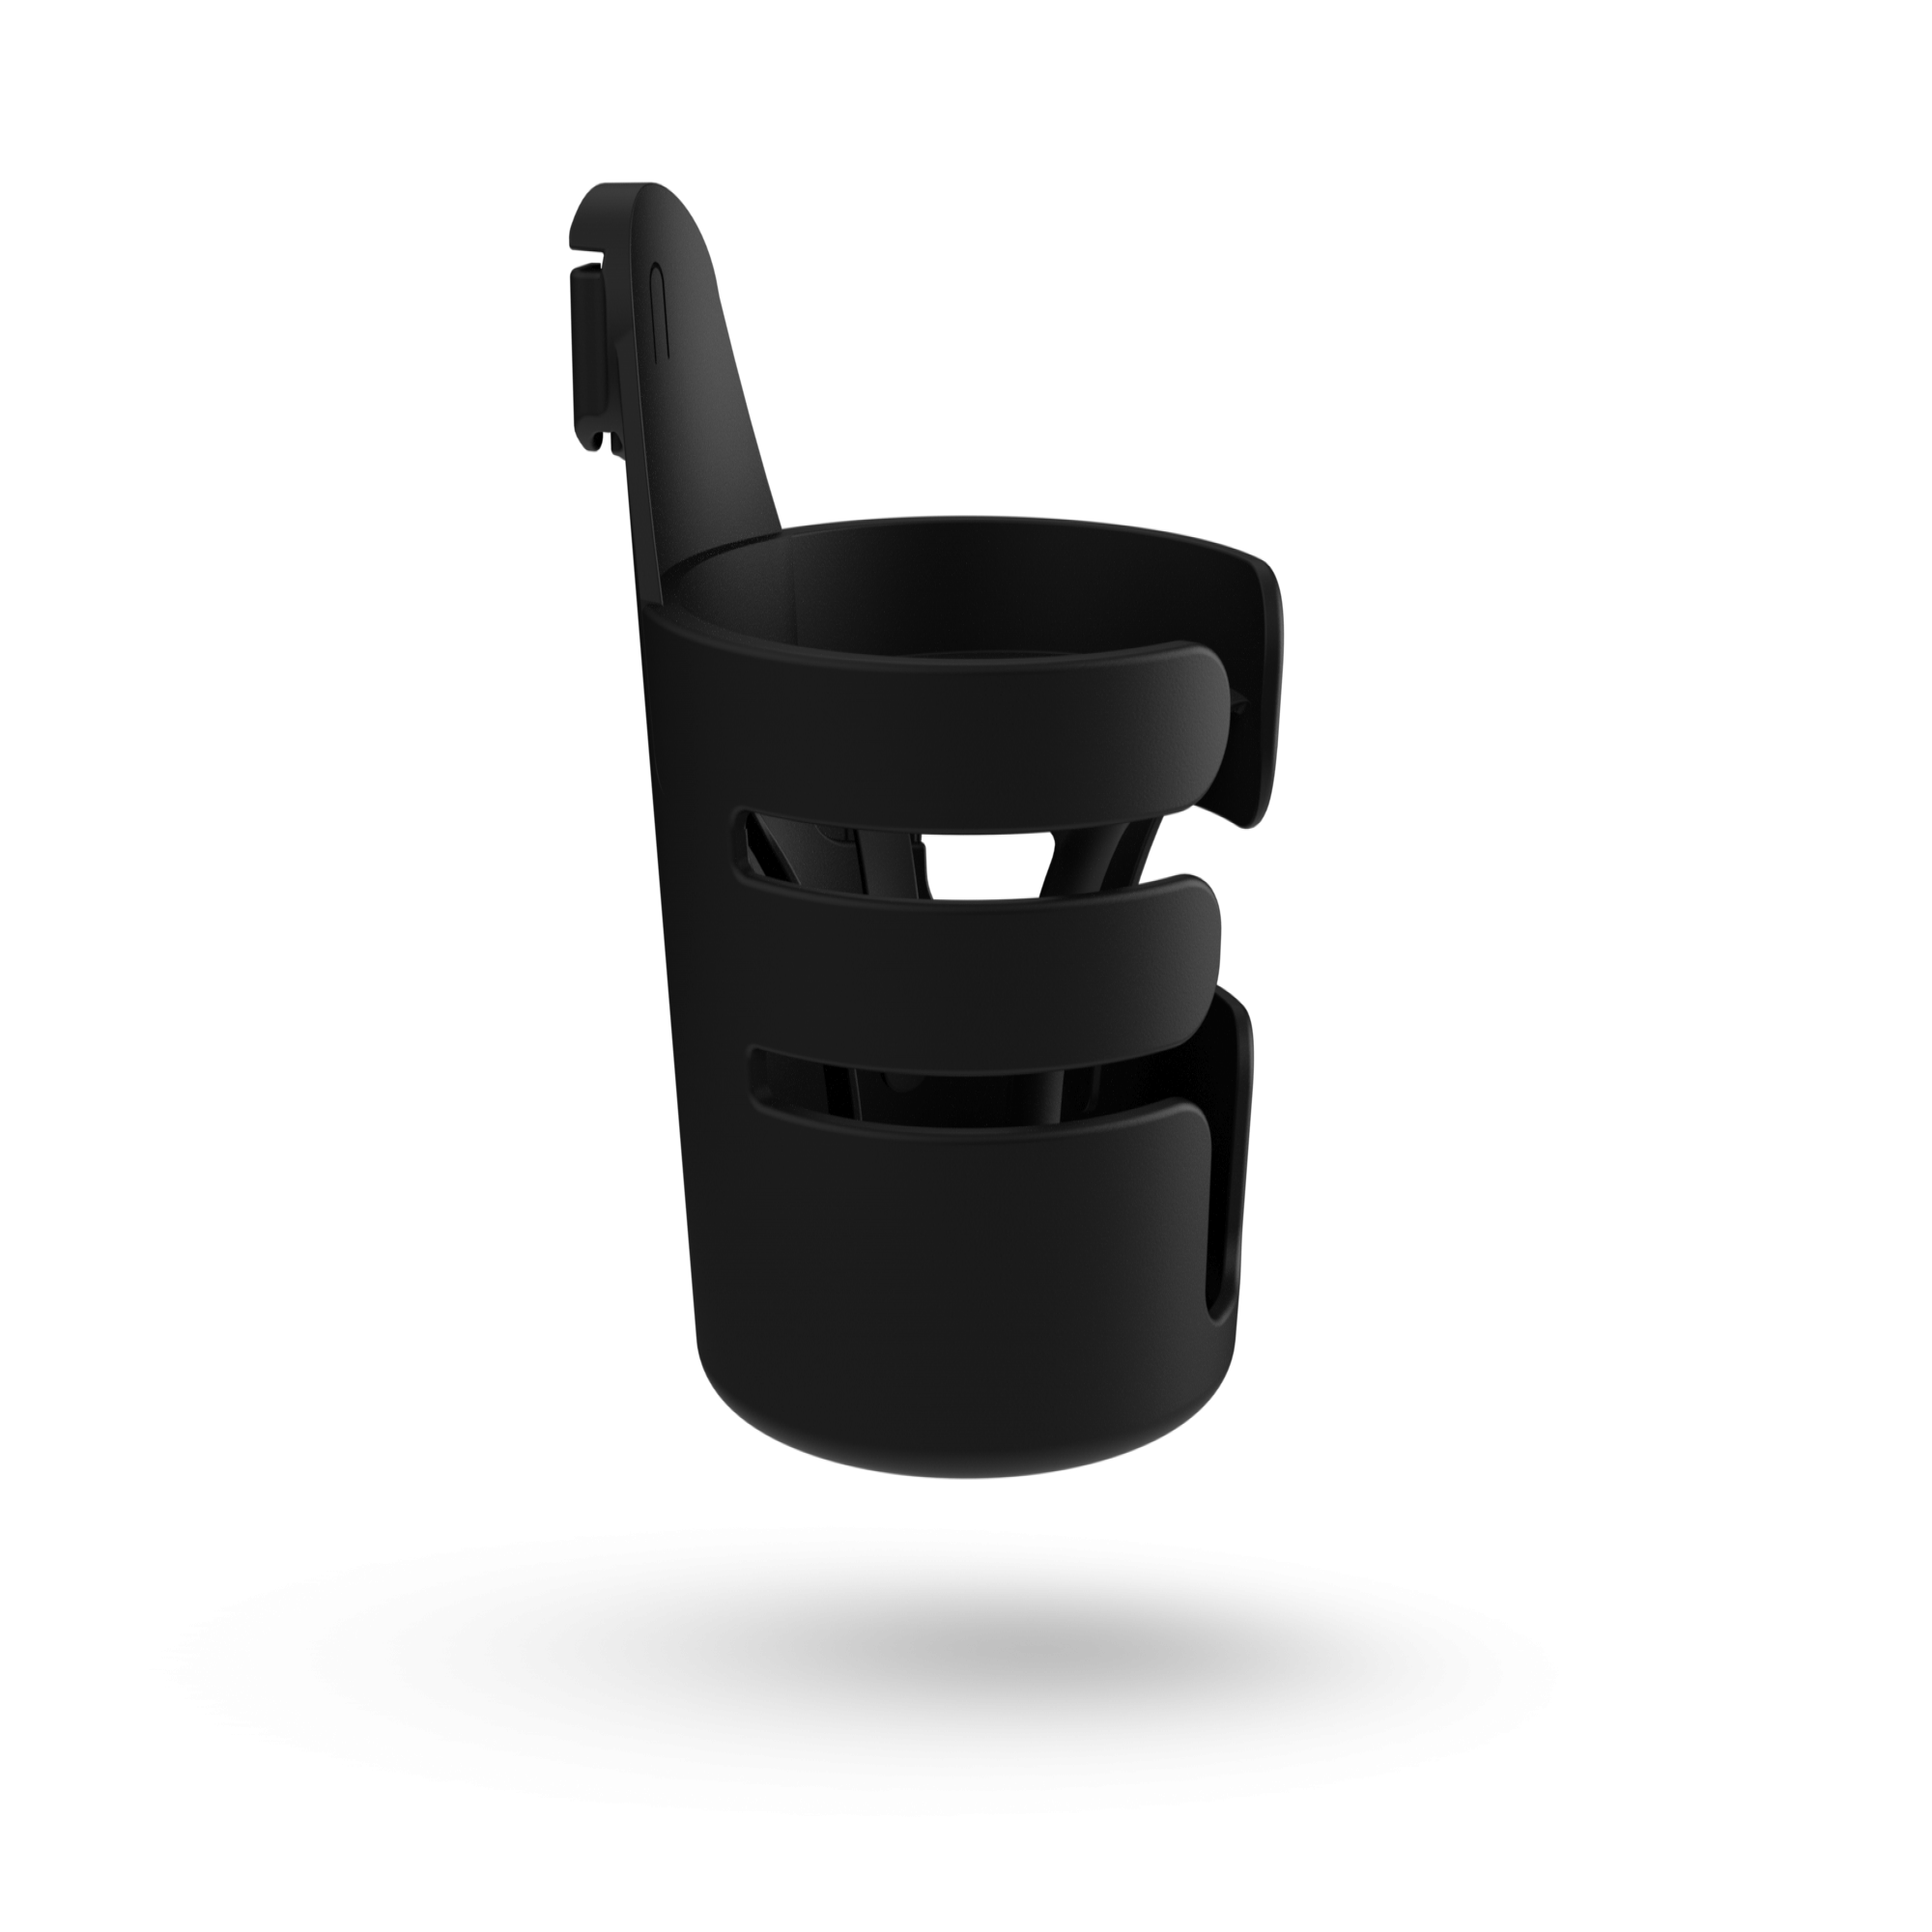 Bugaboo cup holder | Bugaboo US